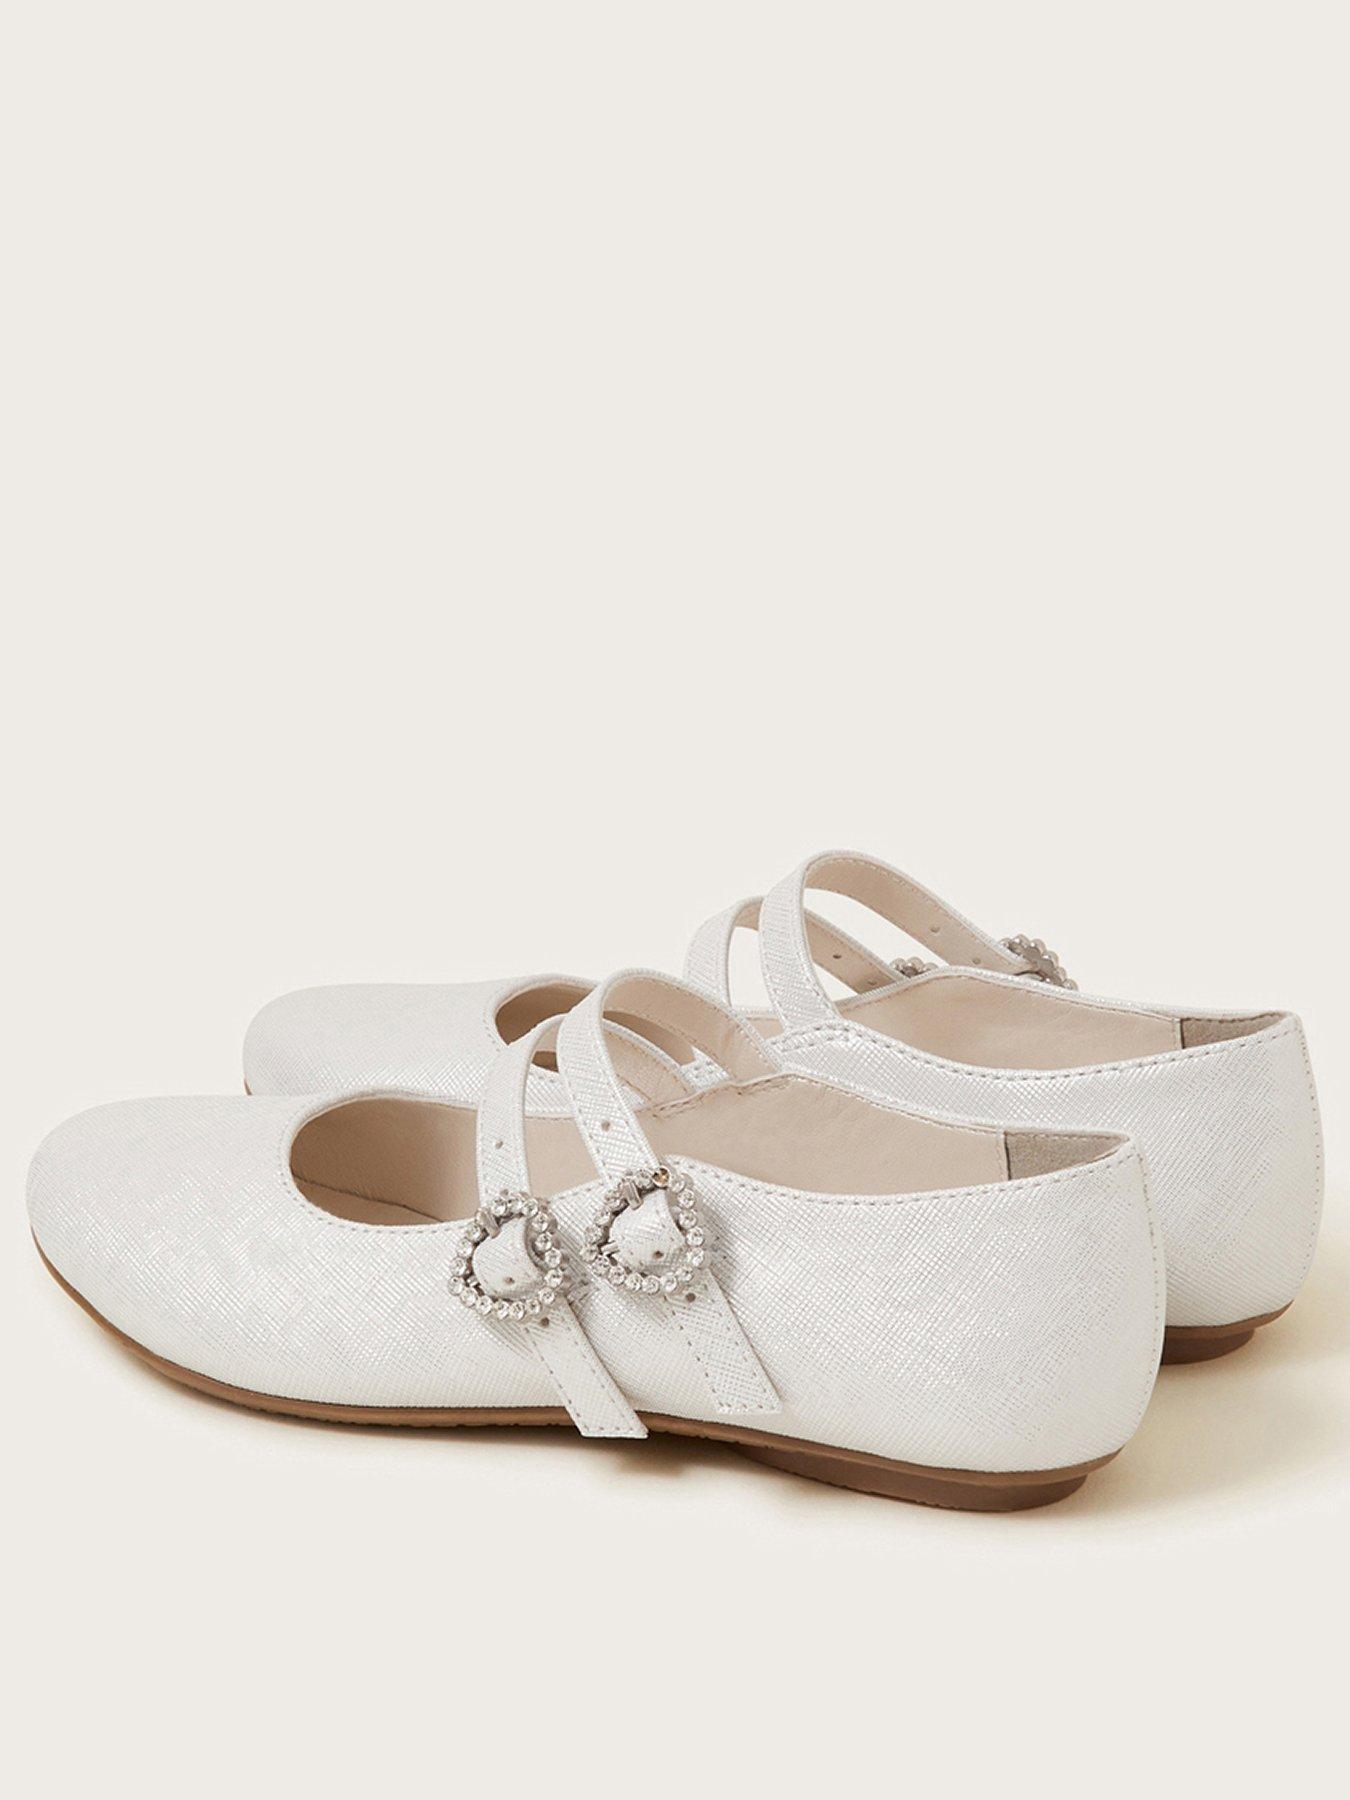 Monsoon Girls Sparkle Two Strap Ballerina Flat Shoes - Silver | Very.co.uk